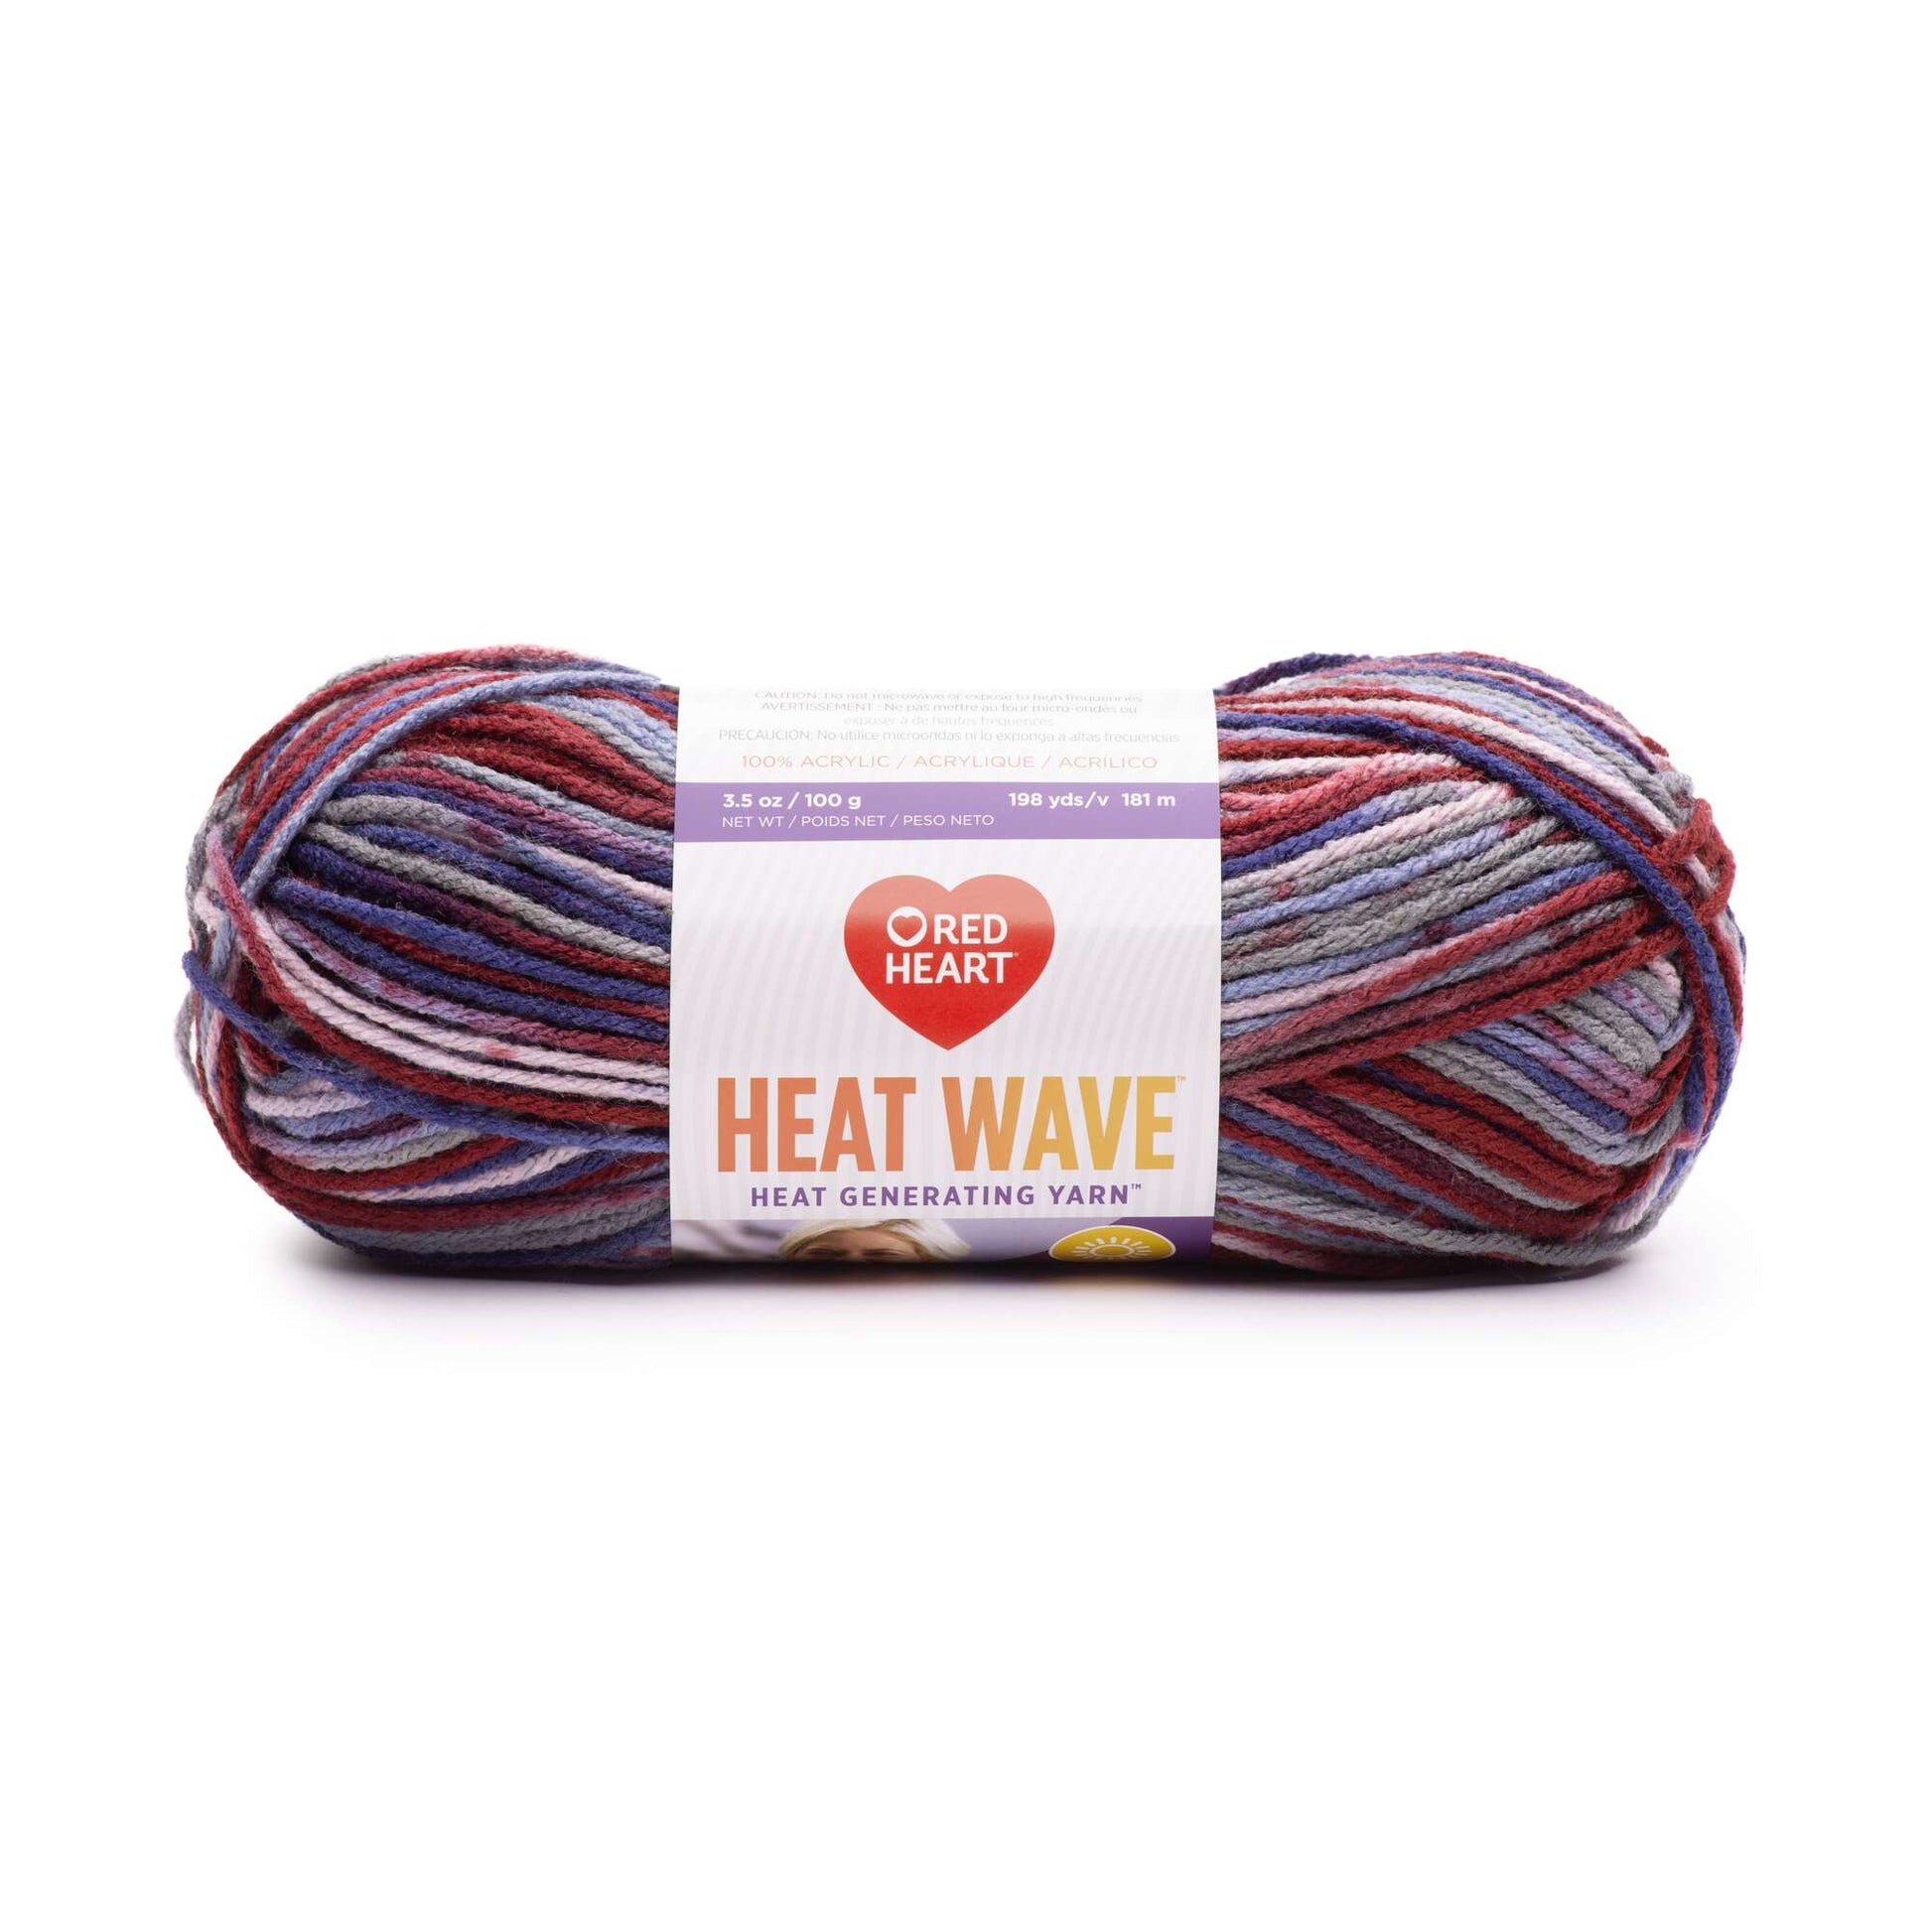 Red Heart Heat Wave Yarn - Discontinued shades Tourist